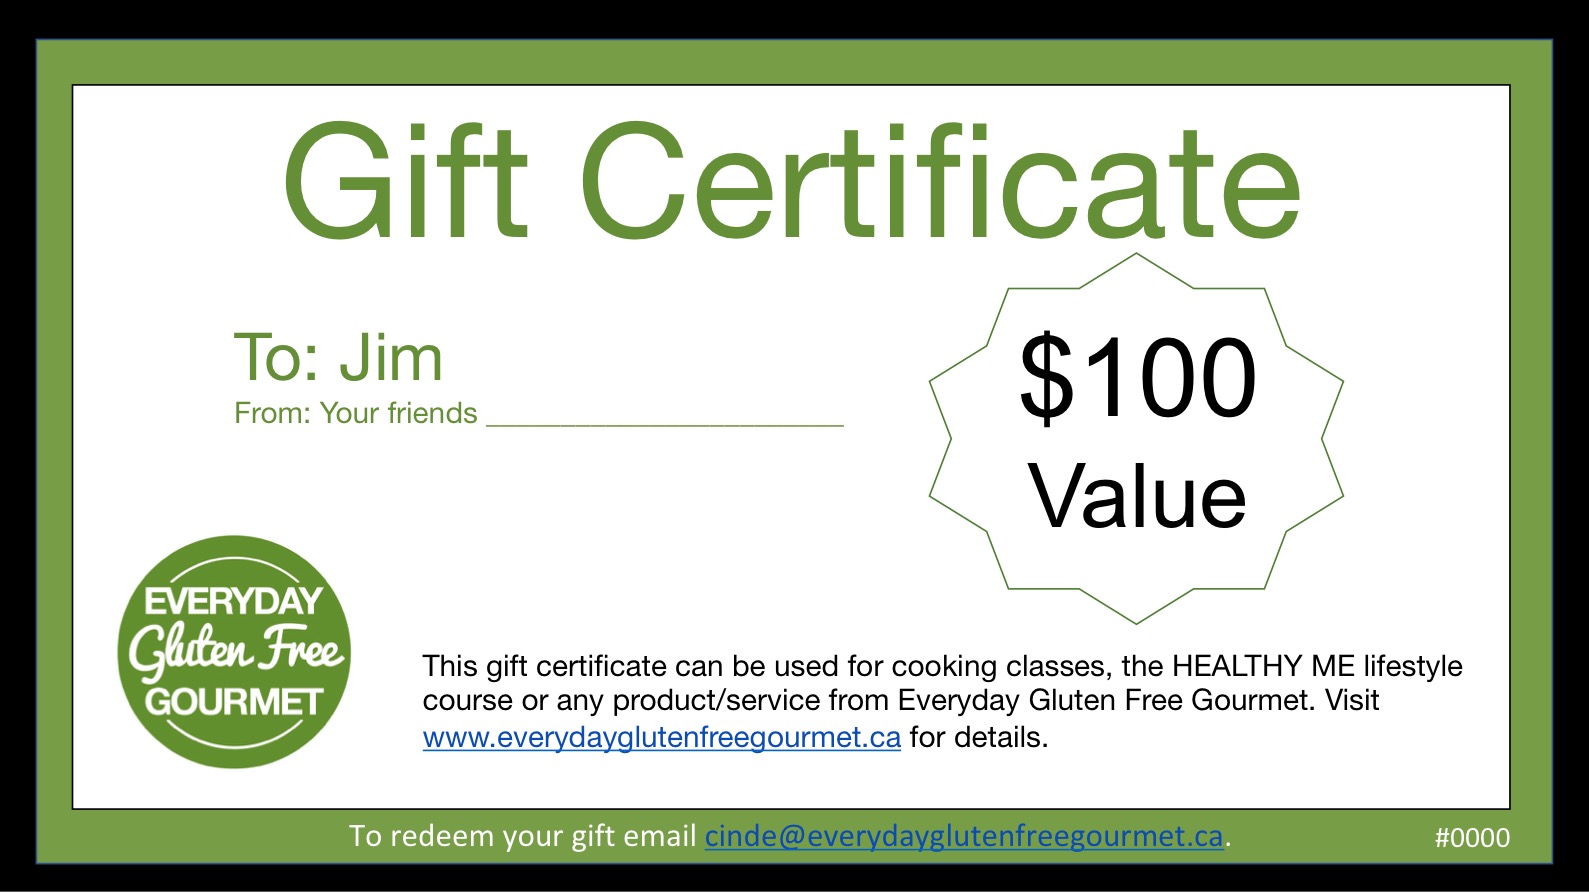 Sample Printable Gift Certificate for purchase.